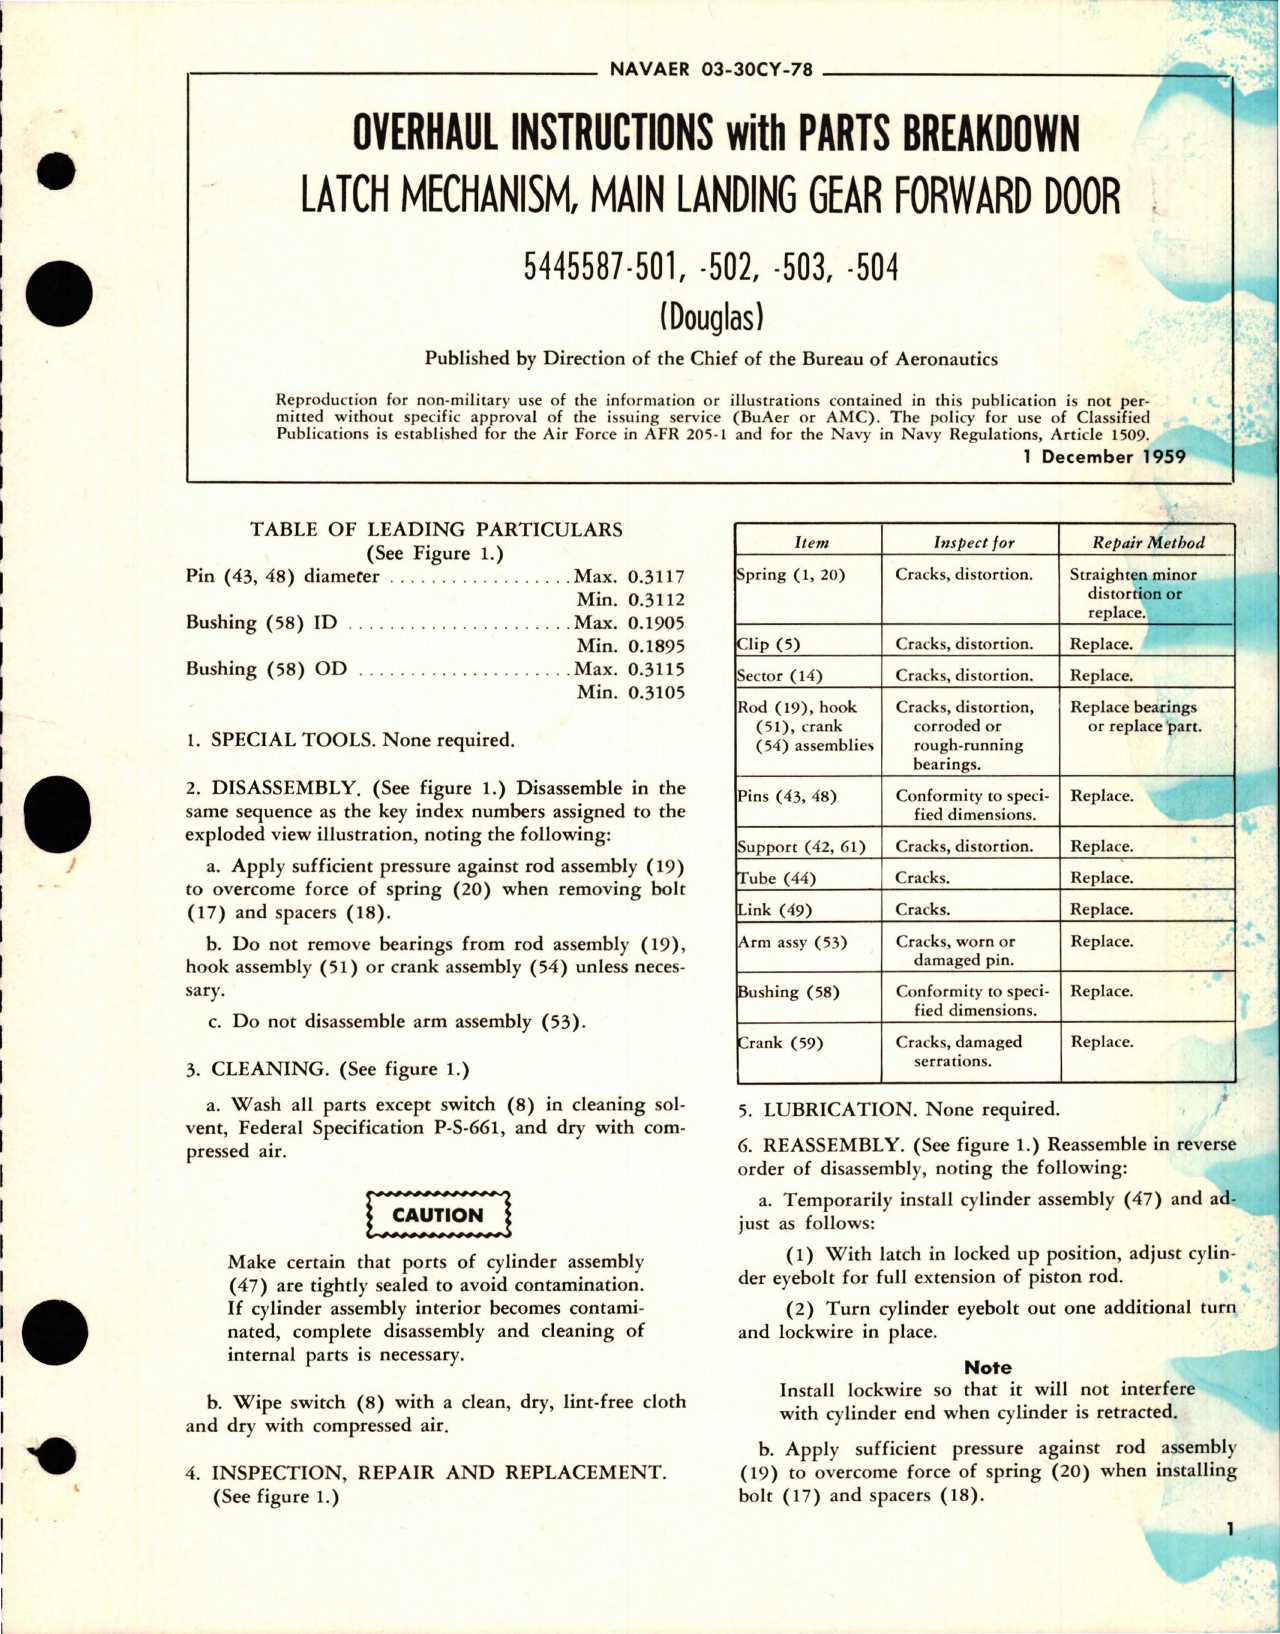 Sample page 1 from AirCorps Library document: Overhaul Instructions with Parts Breakdown for Main Landing Gear Forward Door Latch Mechanism - 5445587-501, 5445587-503, and 5445587-504